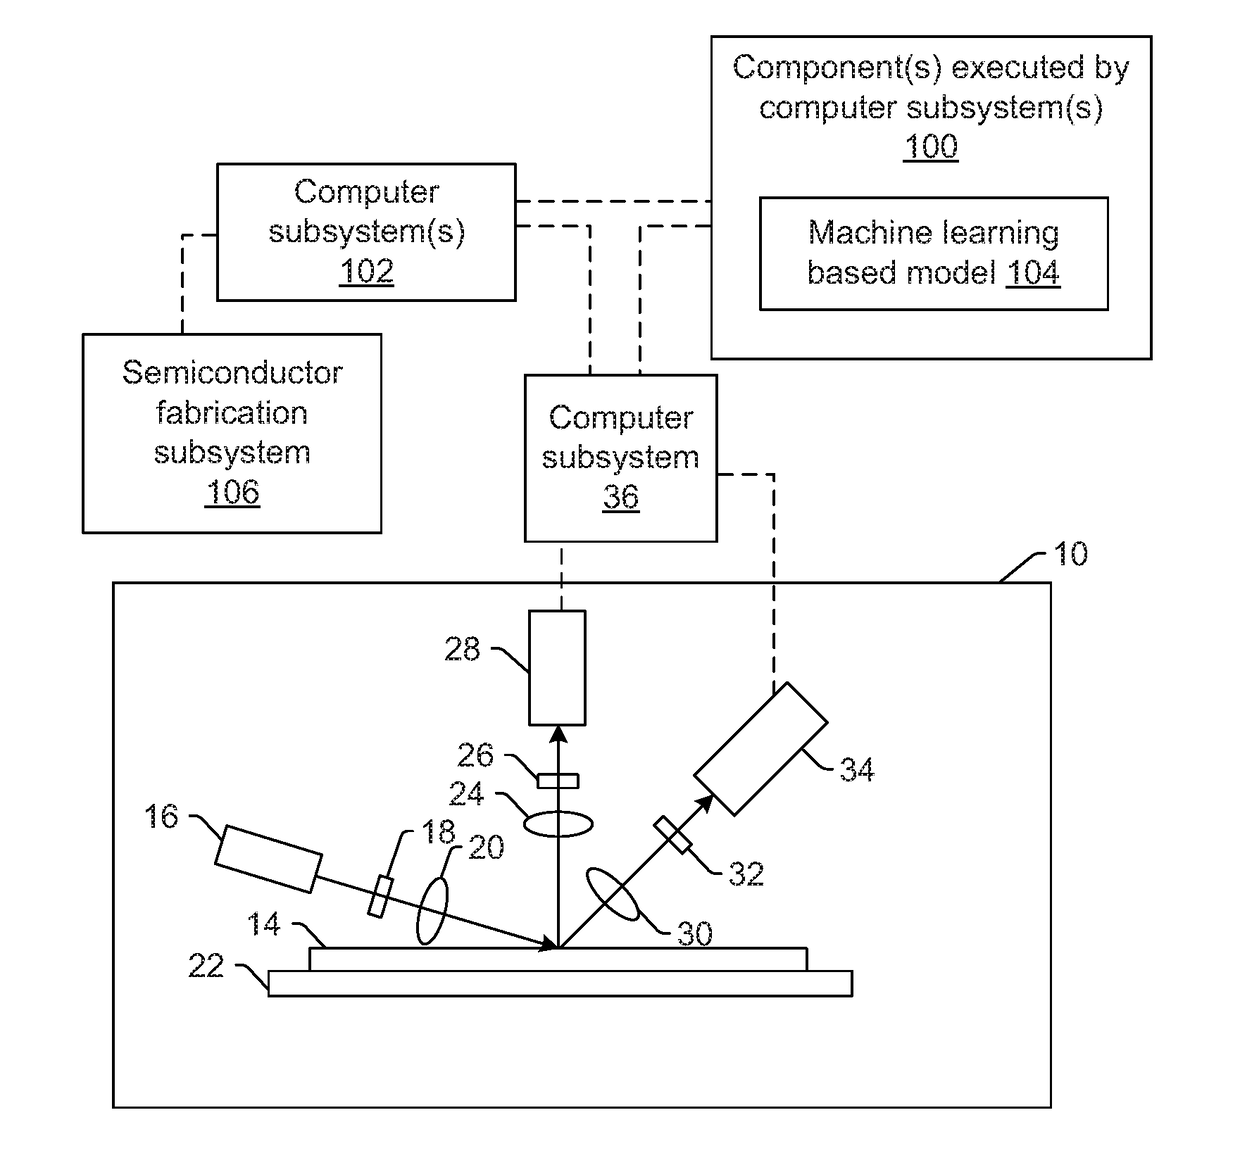 Accelerated training of a machine learning based model for semiconductor applications